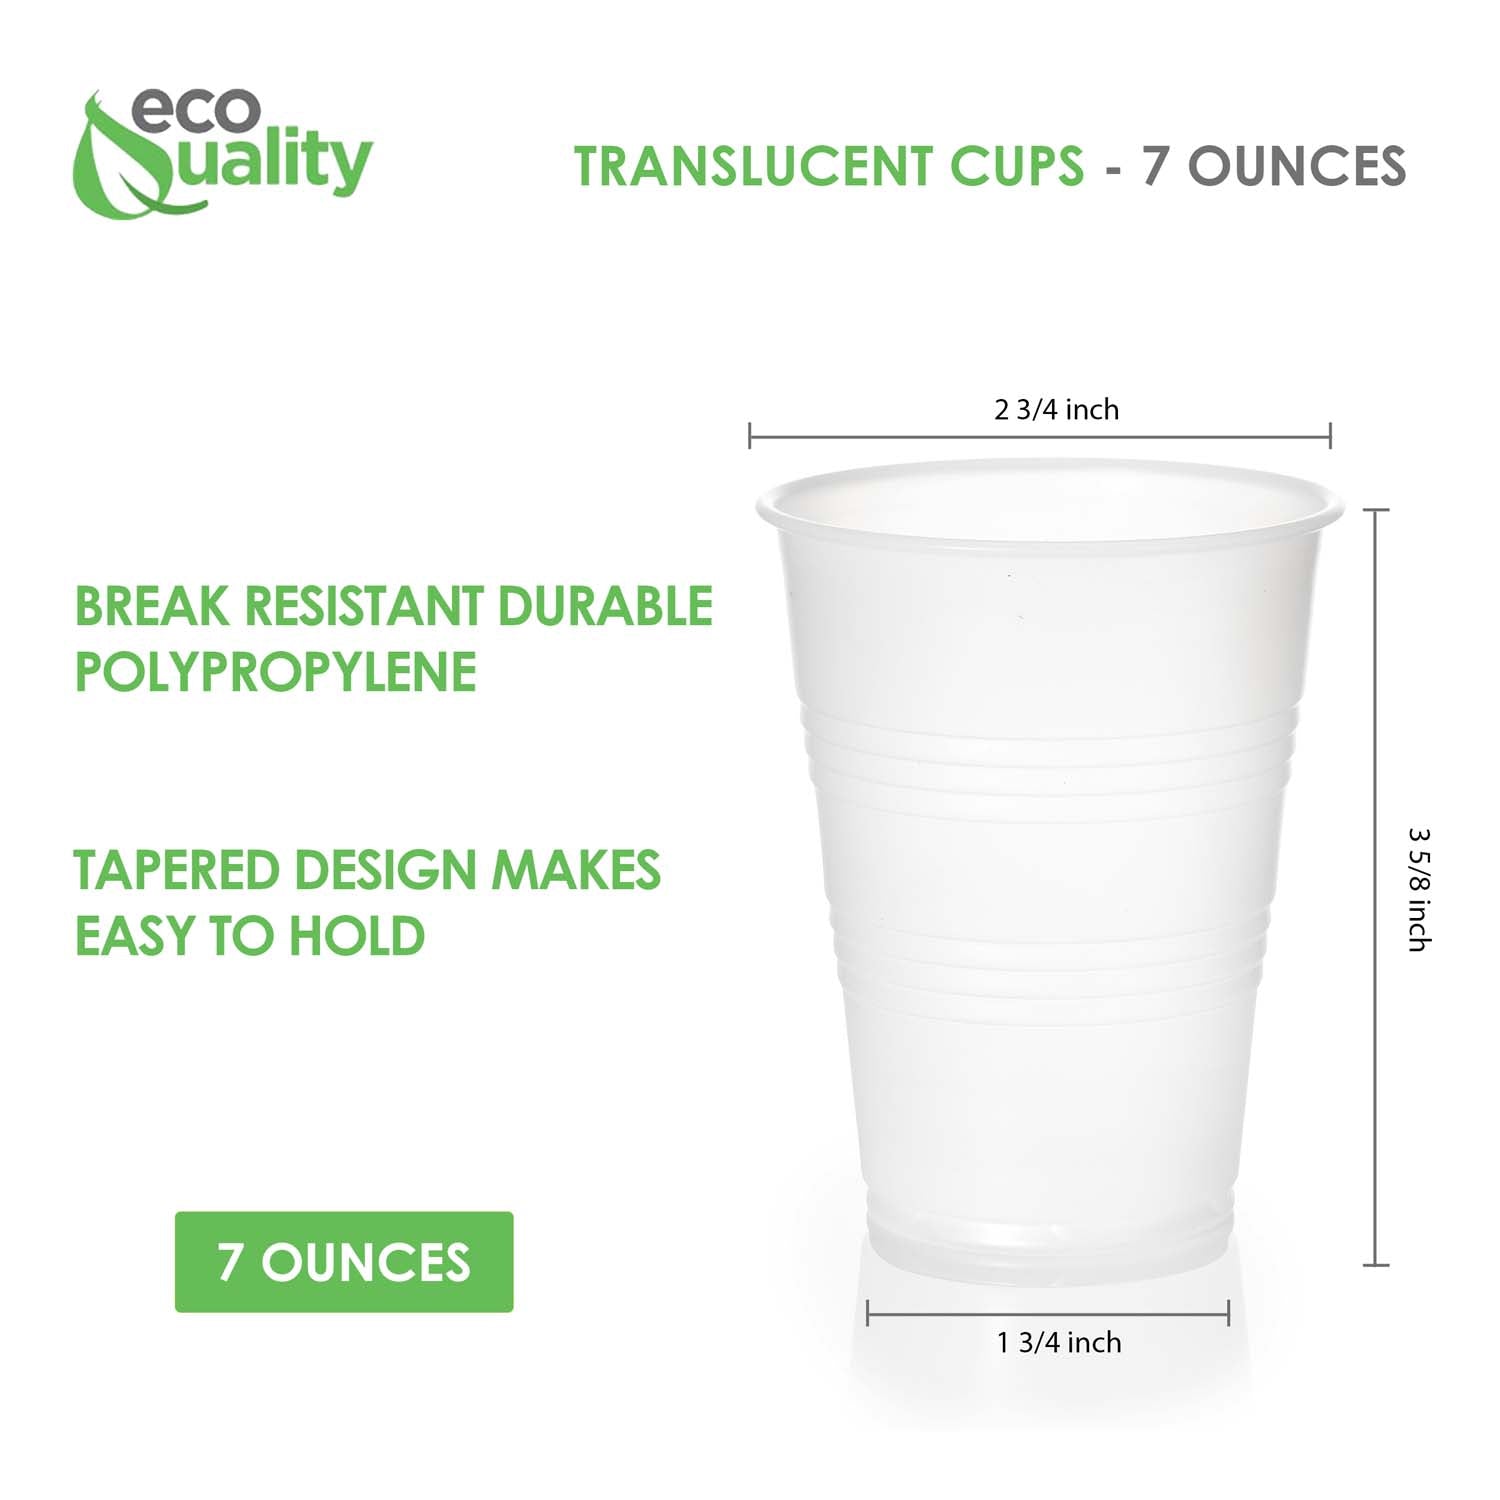 Translucent Plastic Cups - Disposable Cold Drink, Soda Cups, Party Cups, Drinking Cups for Home, Office, Events, Weddings, Parties